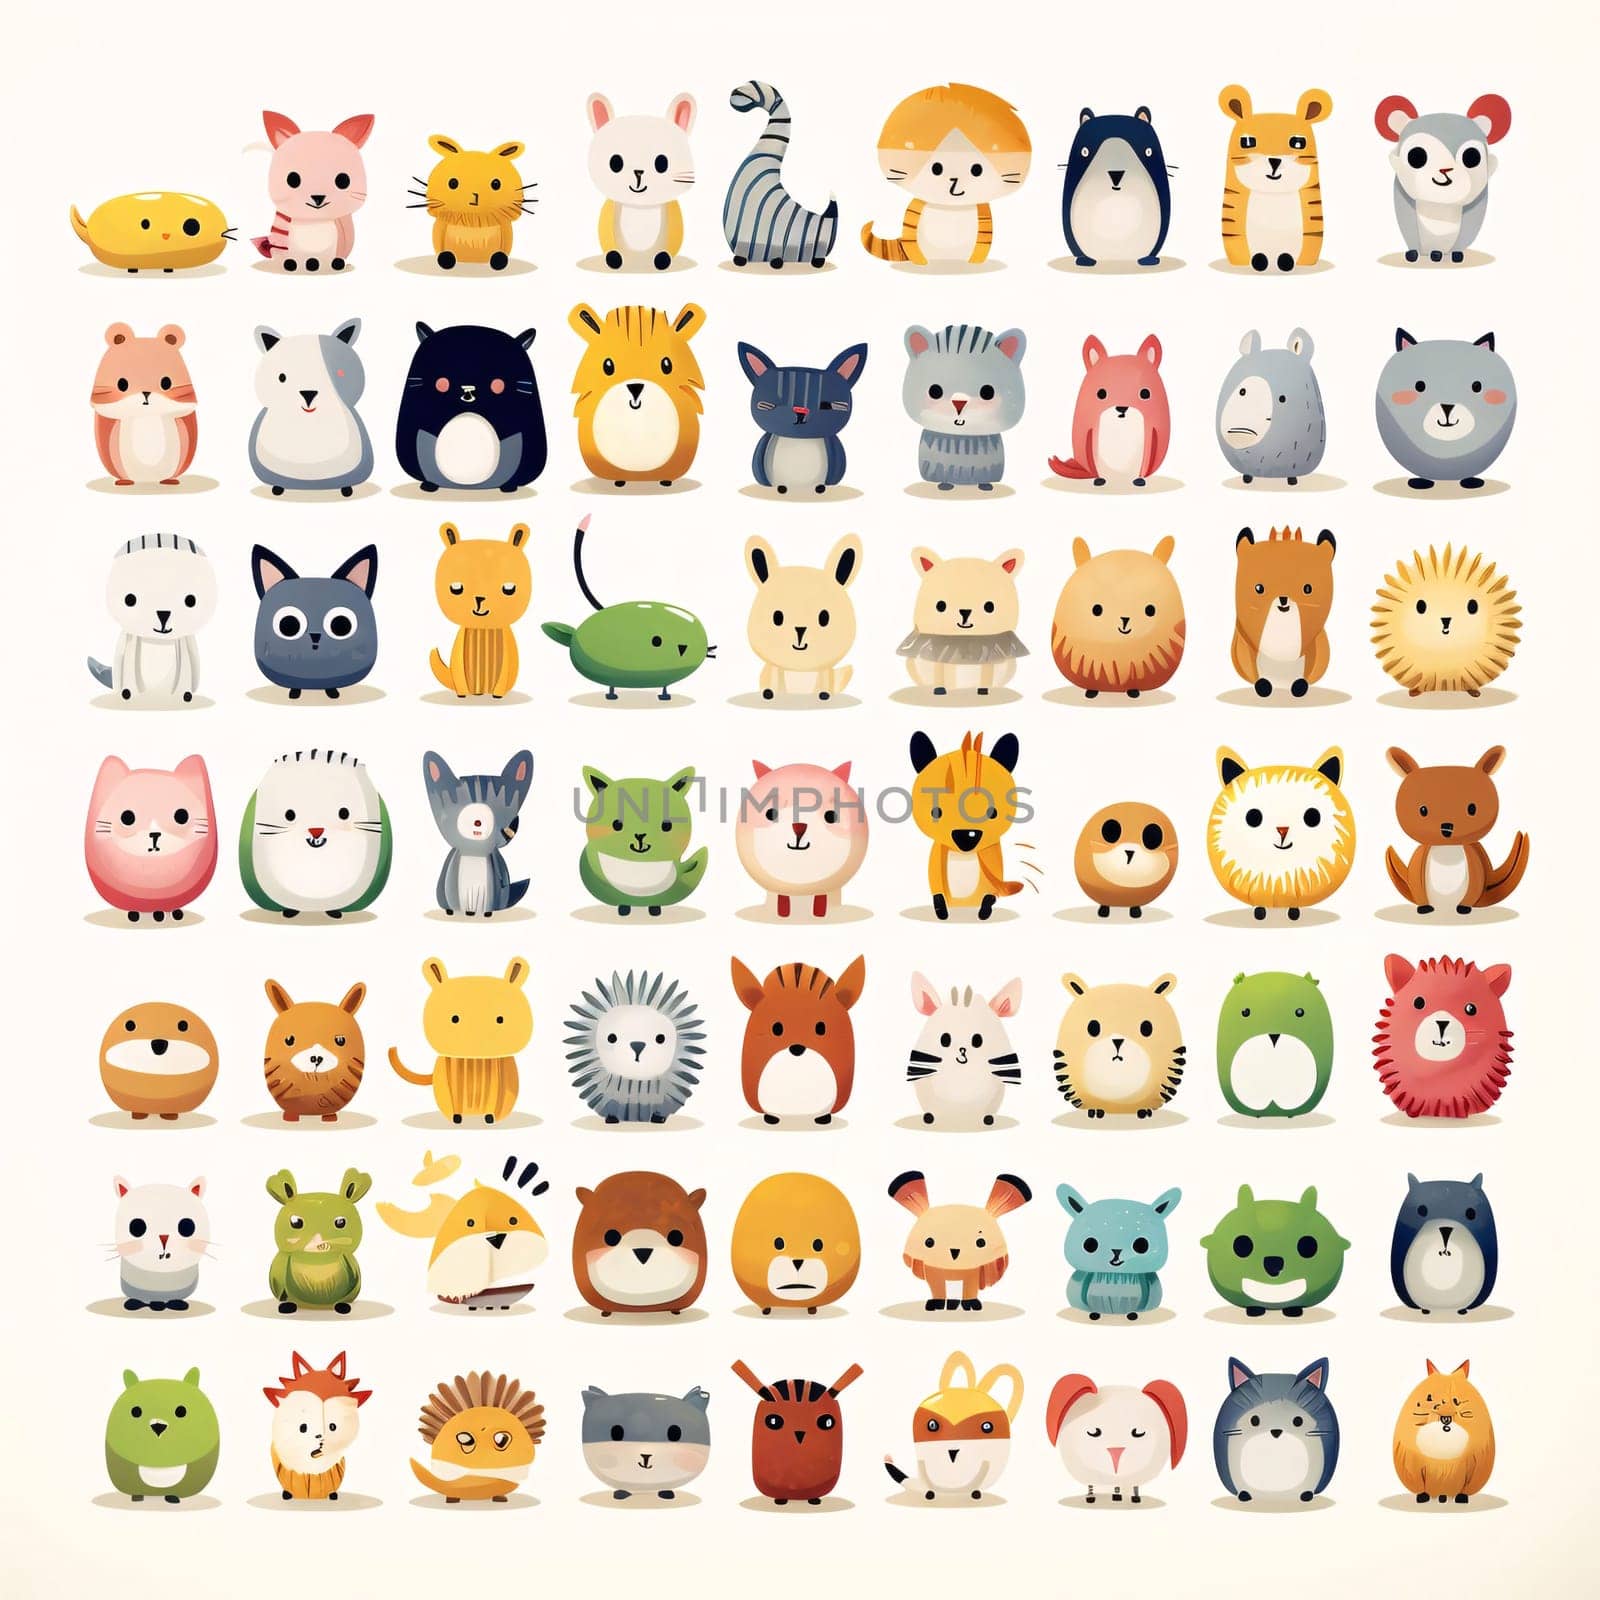 New icons collection: Set of cute animals. Vector illustration. Cute cartoon animals.